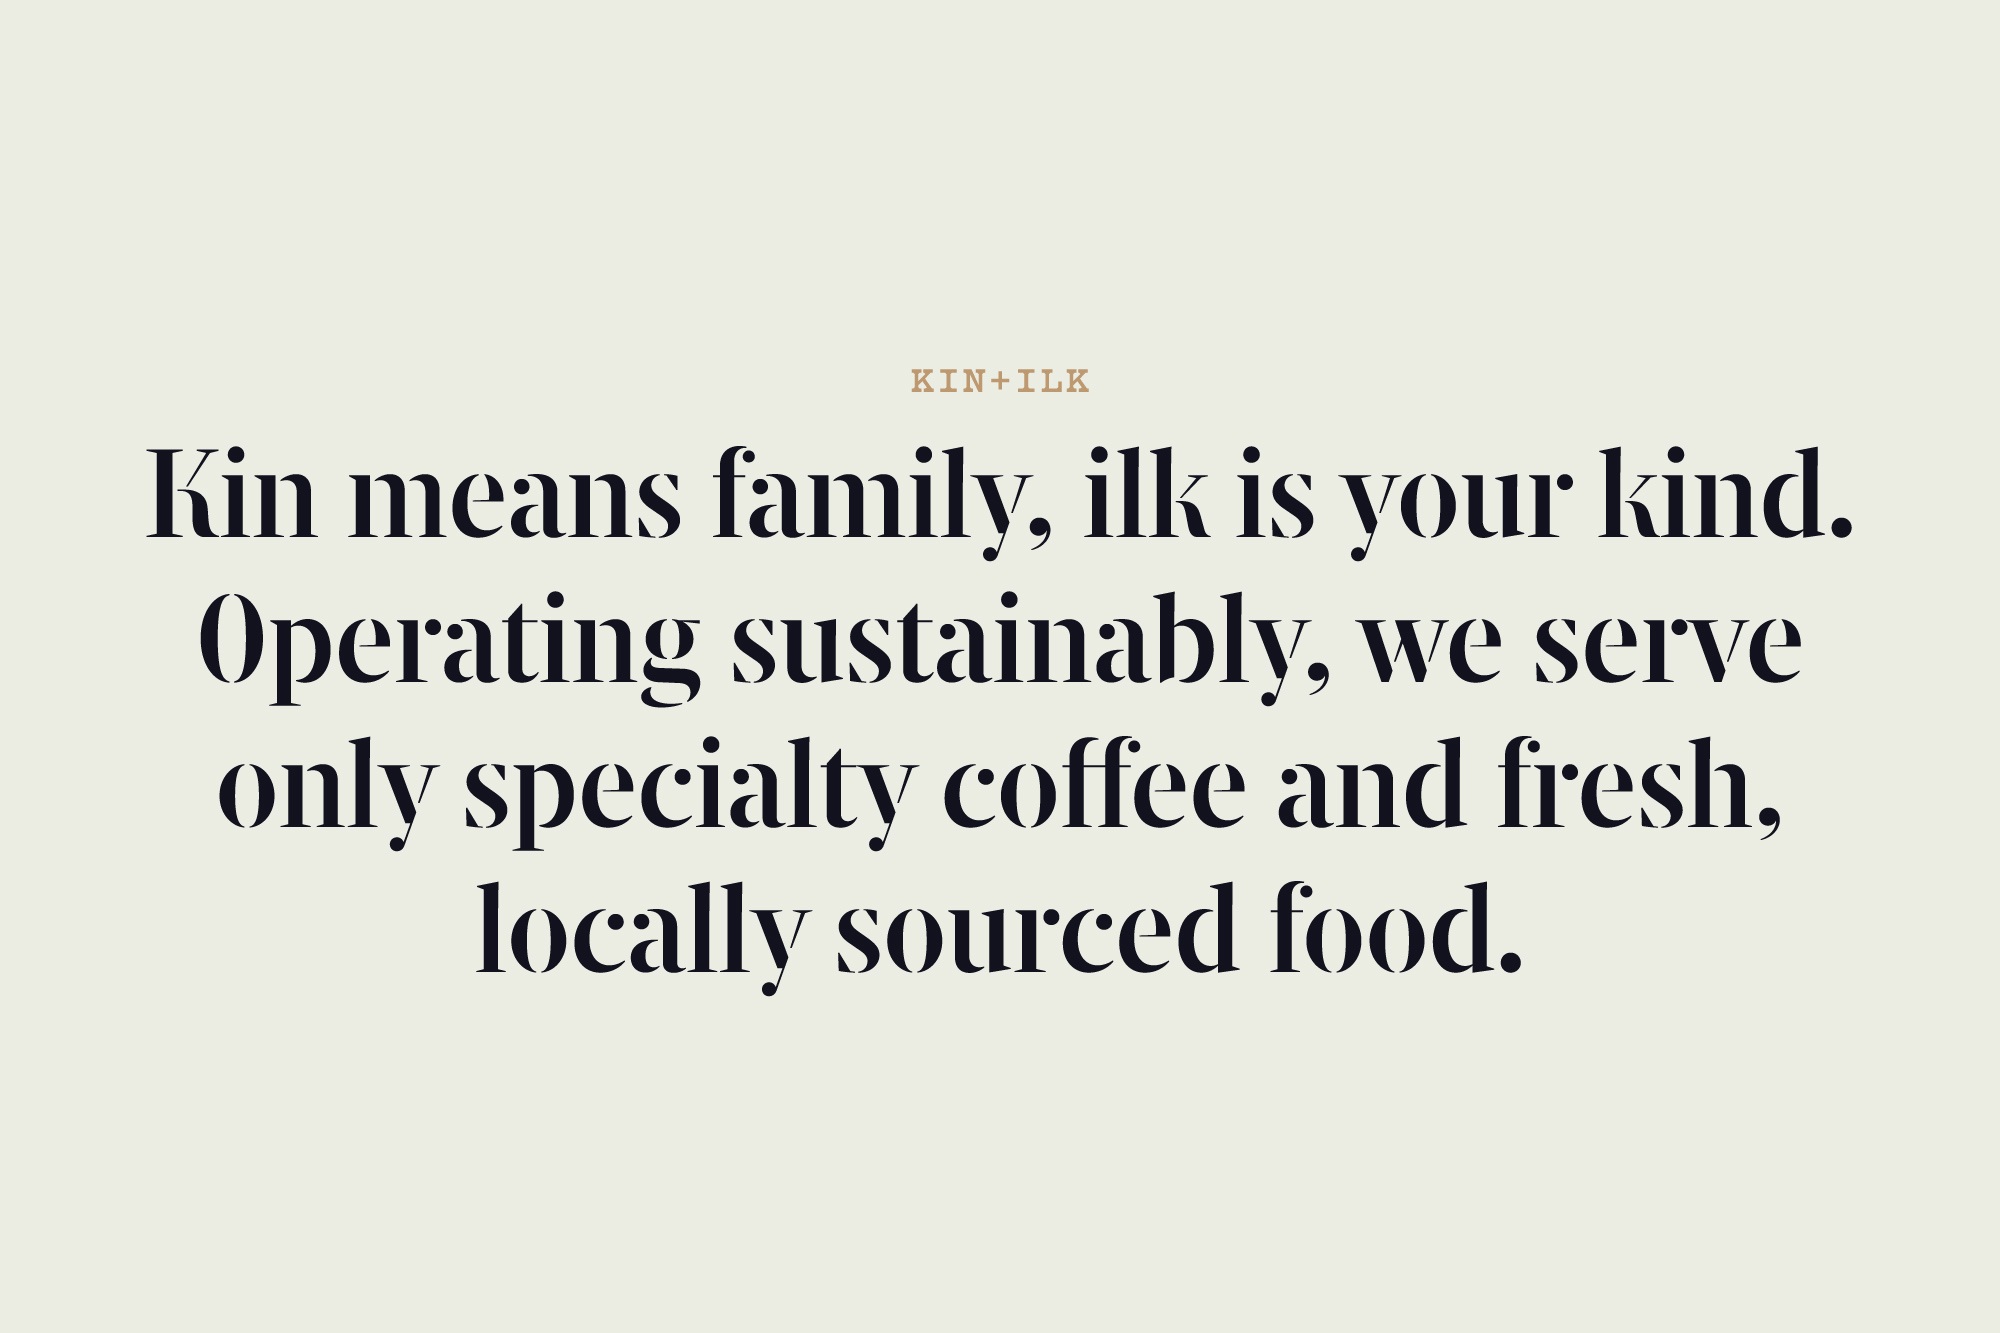 Reads: Kin means family, ilk is your kind. Operating sustainably, we serve only specialty coffee and fresh, locally sourced food. 